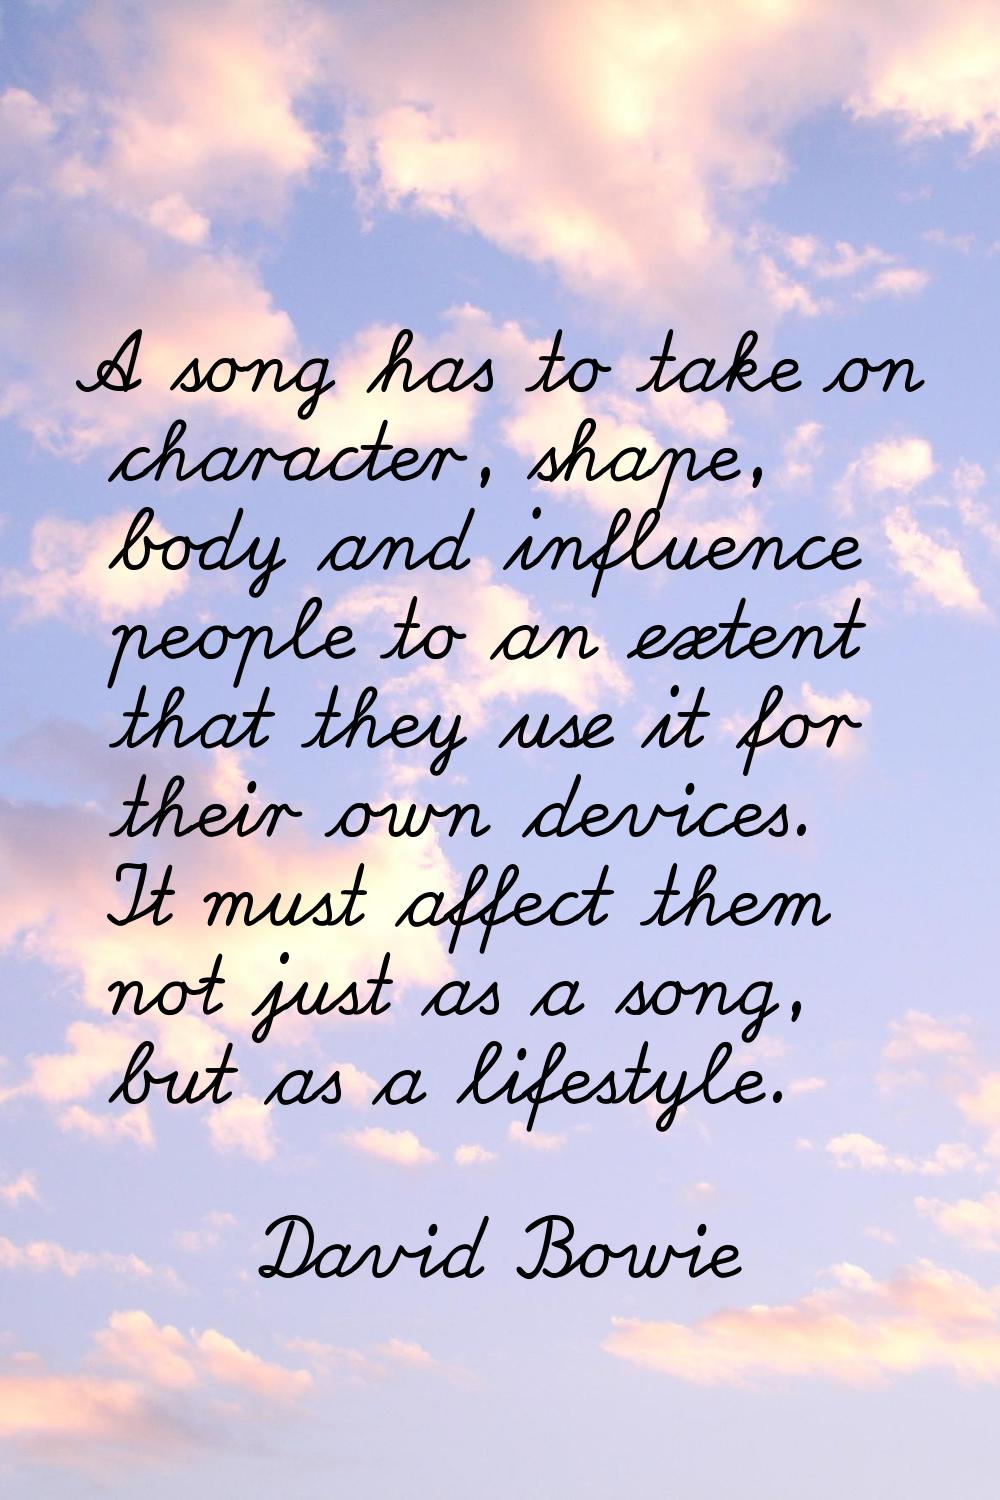 A song has to take on character, shape, body and influence people to an extent that they use it for